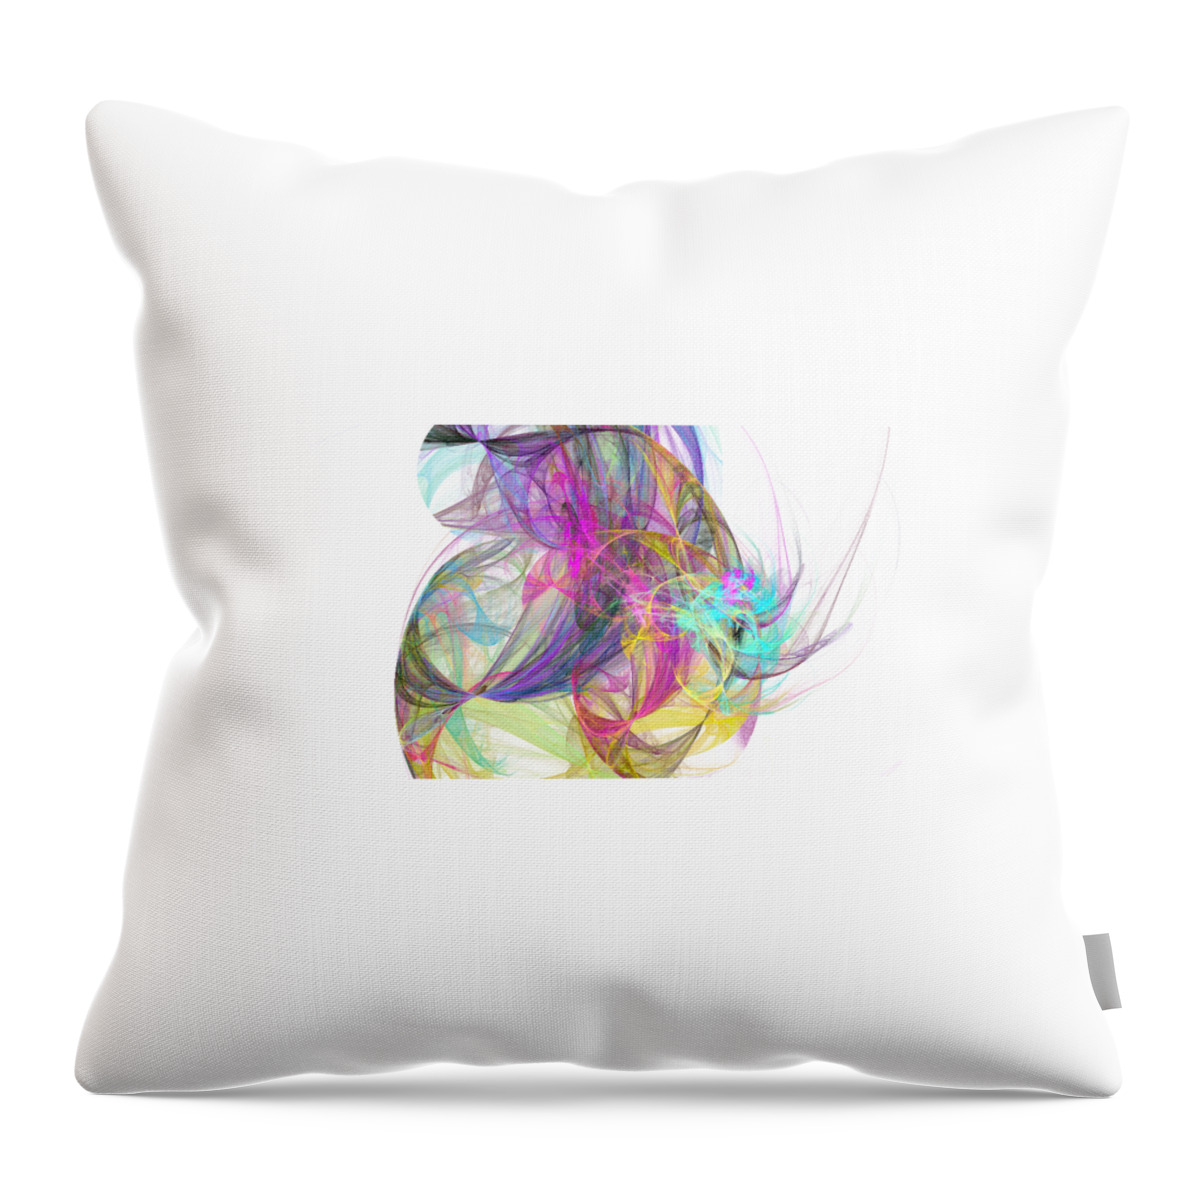 Space Throw Pillow featuring the digital art Eye In The Sky by Kelly Dallas